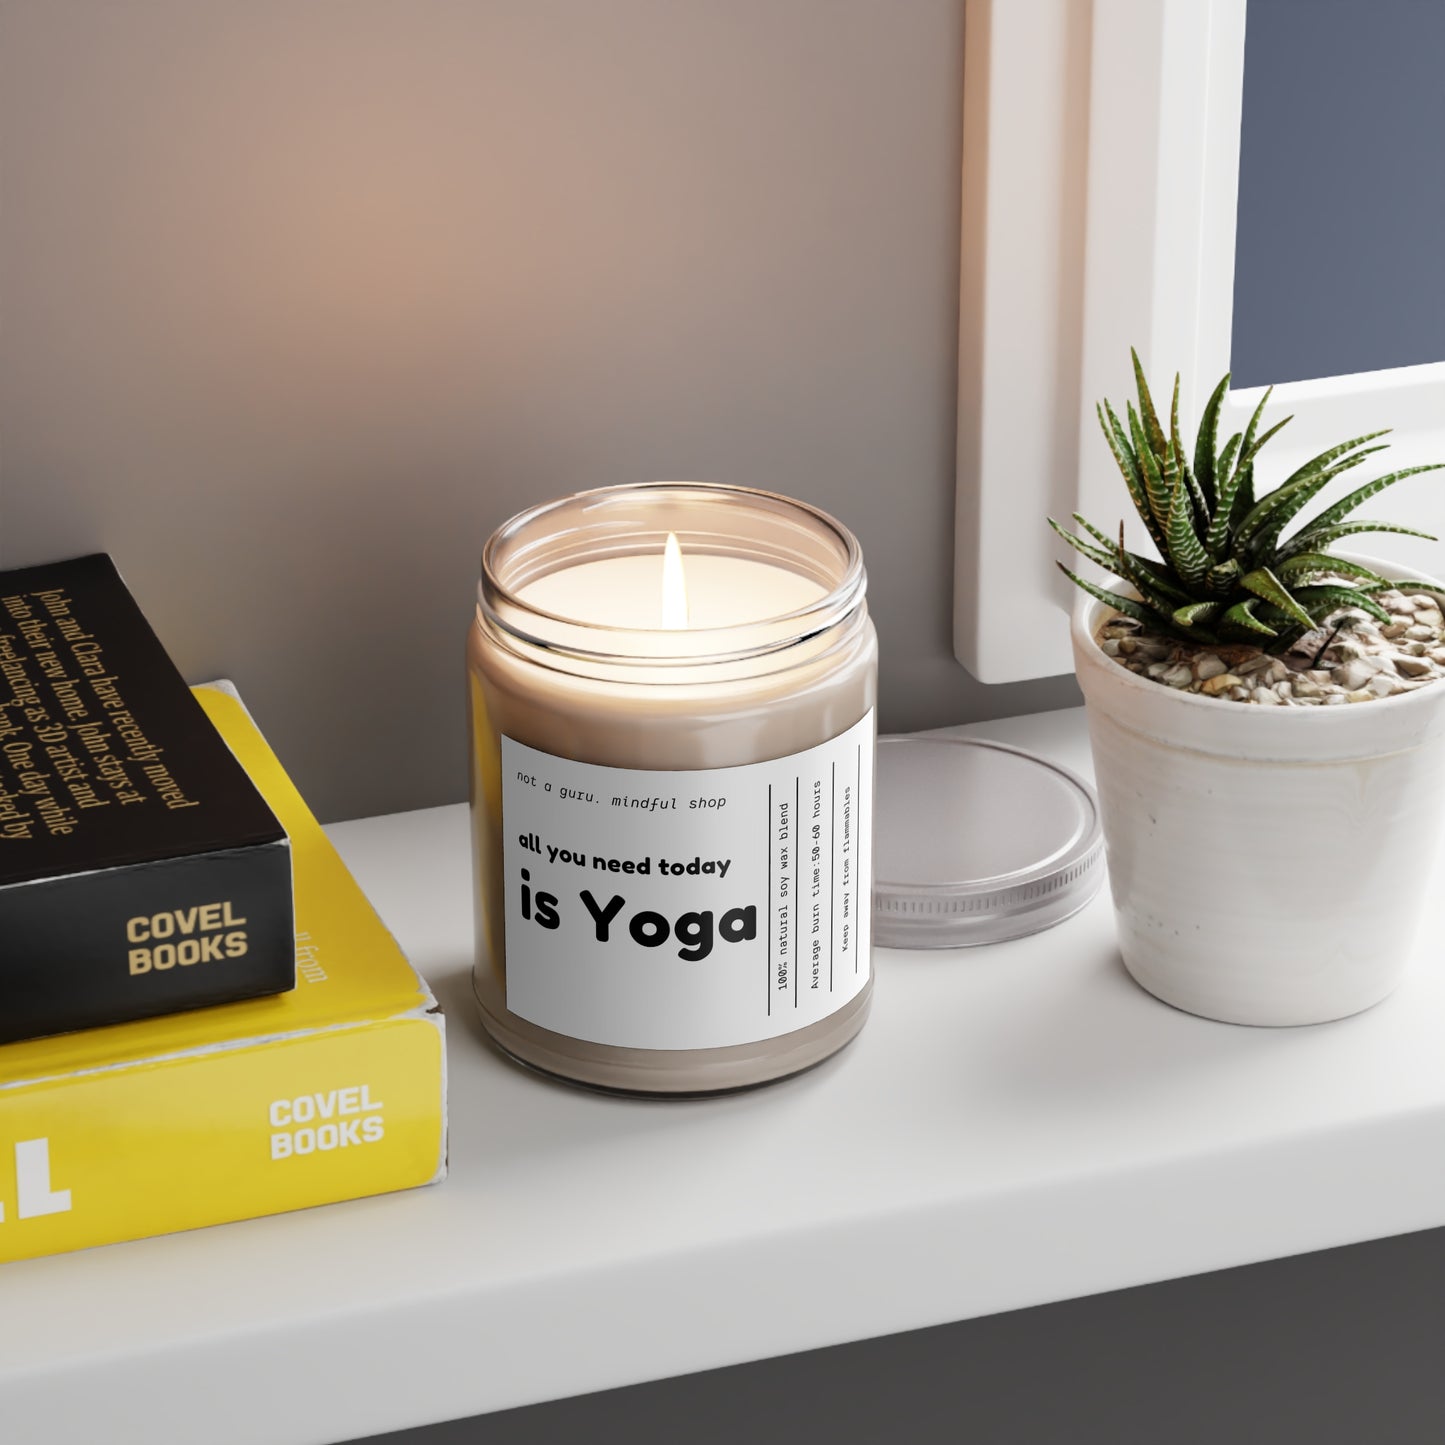 All You Need Today is Yoga Scented Candles